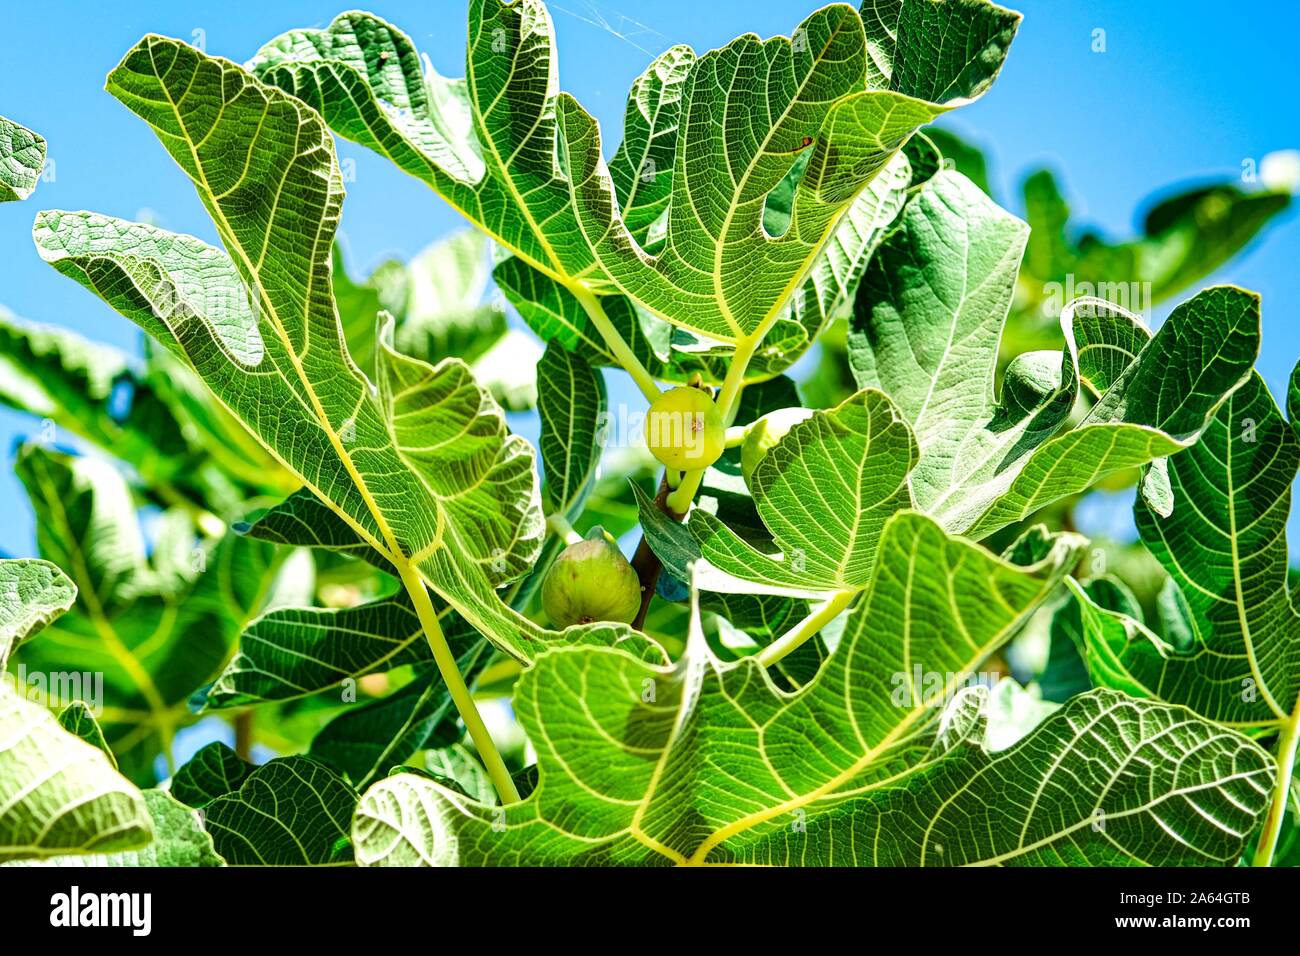 Green figs on the tree in a sunny day with blue sky background. Stock Photo